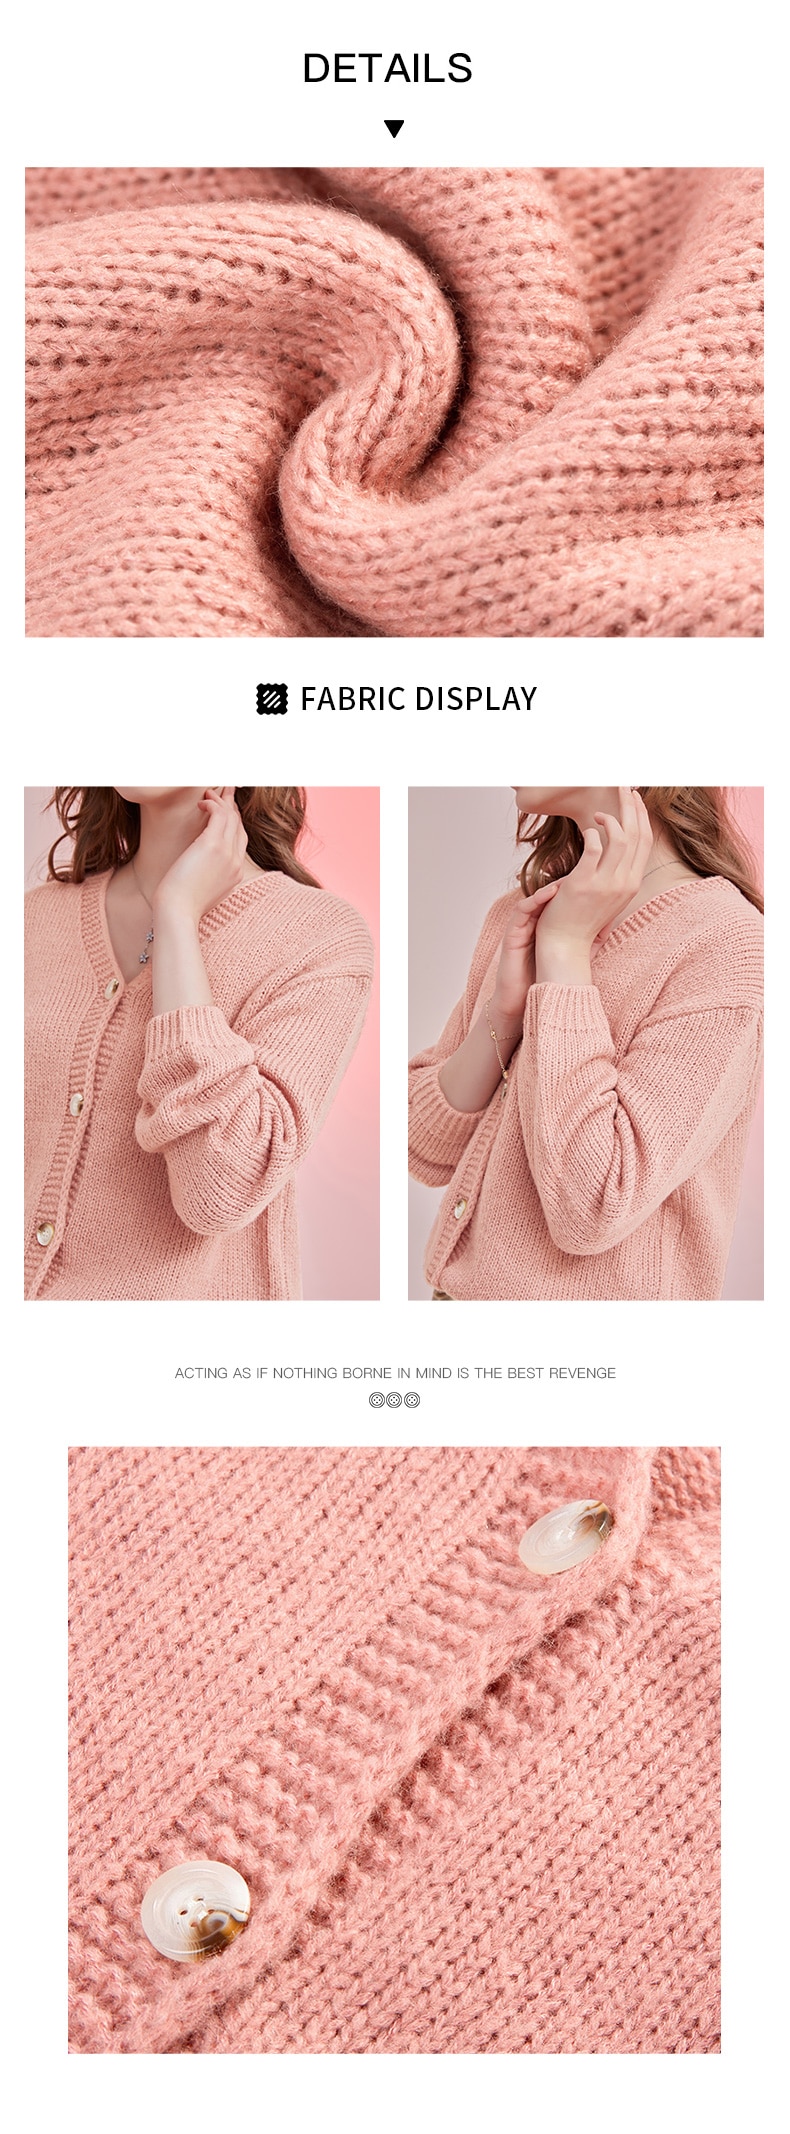 ARTKA 2021 Spring New Women Cardigan Elegant V-Neck Knitted Cardigan Sweaters Soft Loose Knitted Sweater Outerwear WB25110C